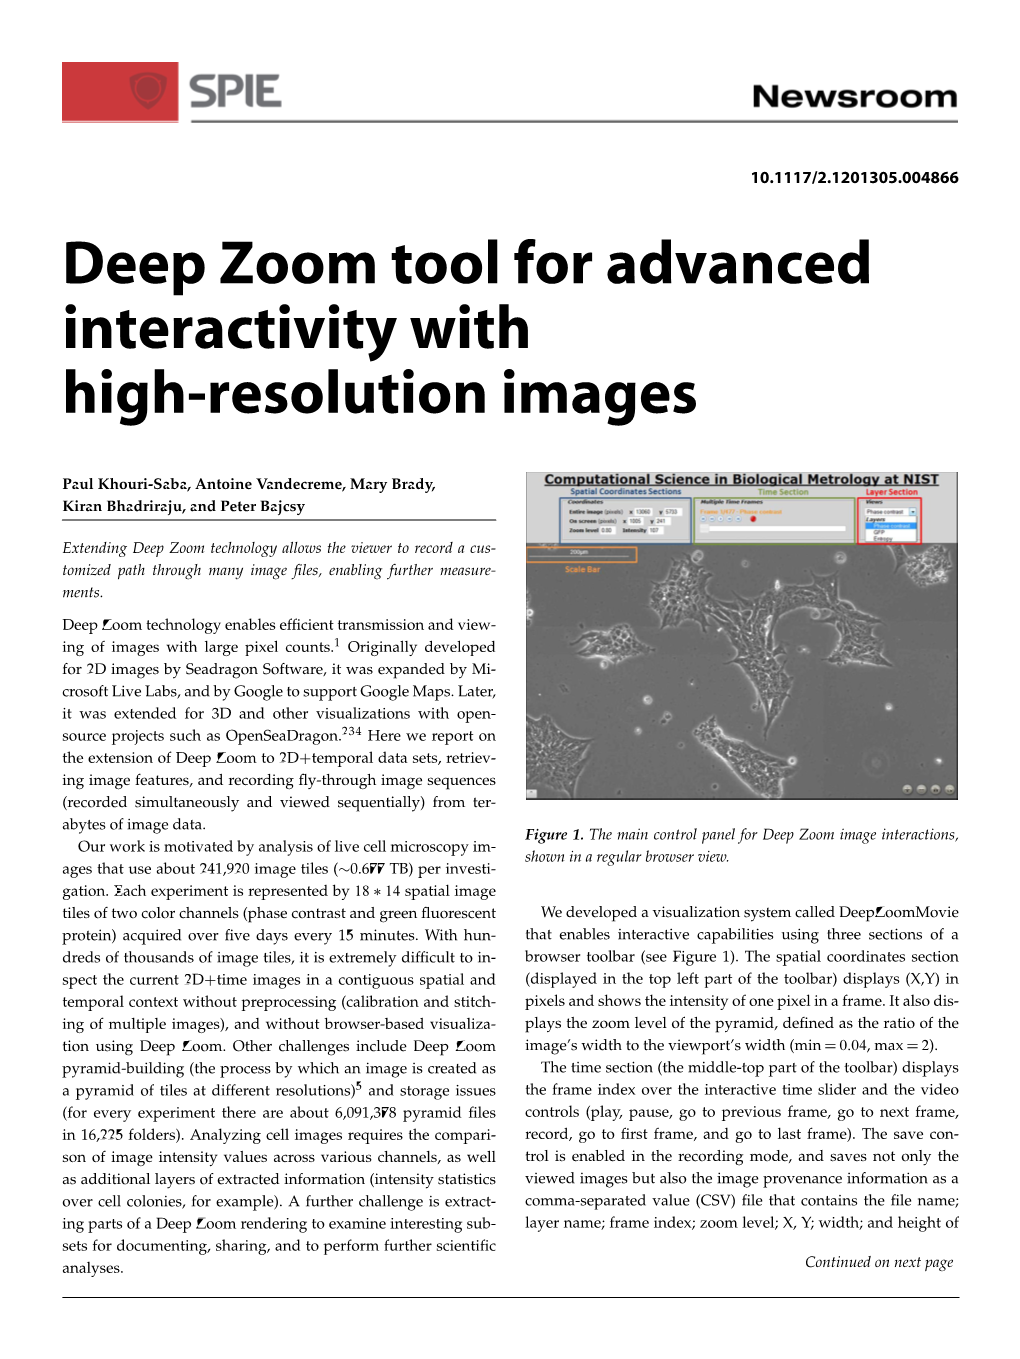 Deep Zoom Tool for Advanced Interactivity with High-Resolution Images